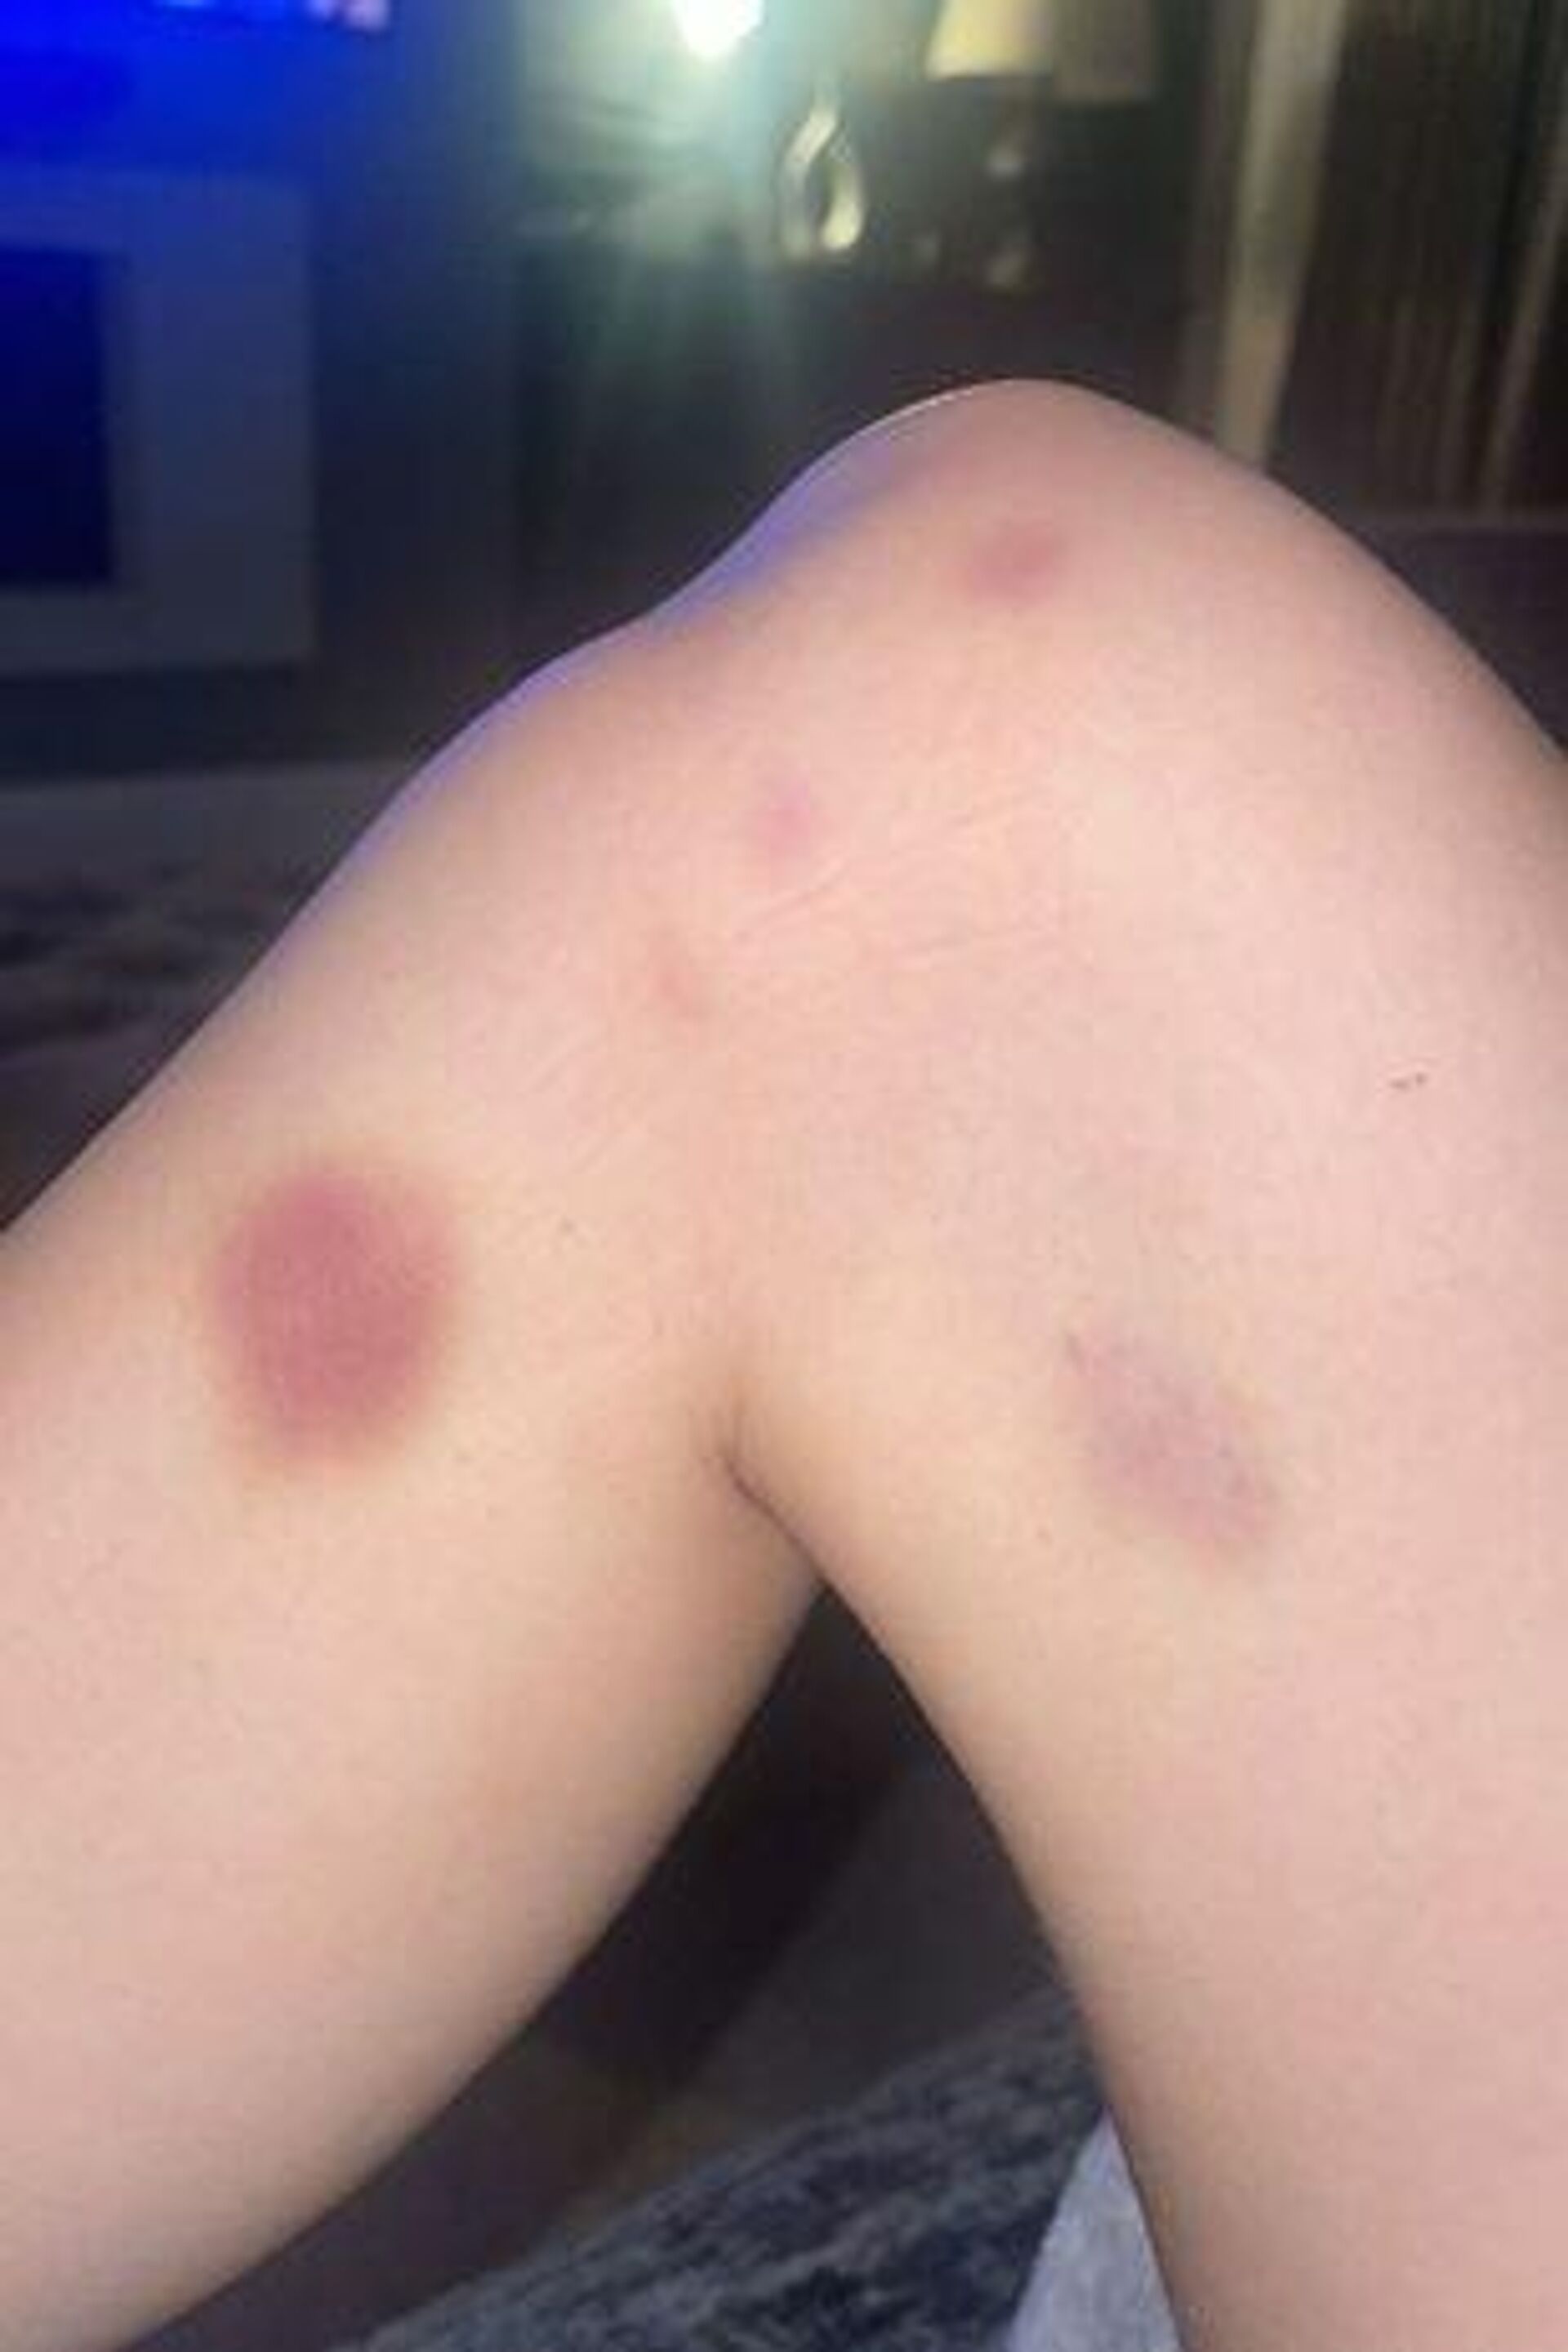 Screenshot of a deleted post published by Harriet Robson, depicting a bruise as she accuses her boyfriend Mason Greenwood of abuse. - Sputnik International, 1920, 30.01.2022